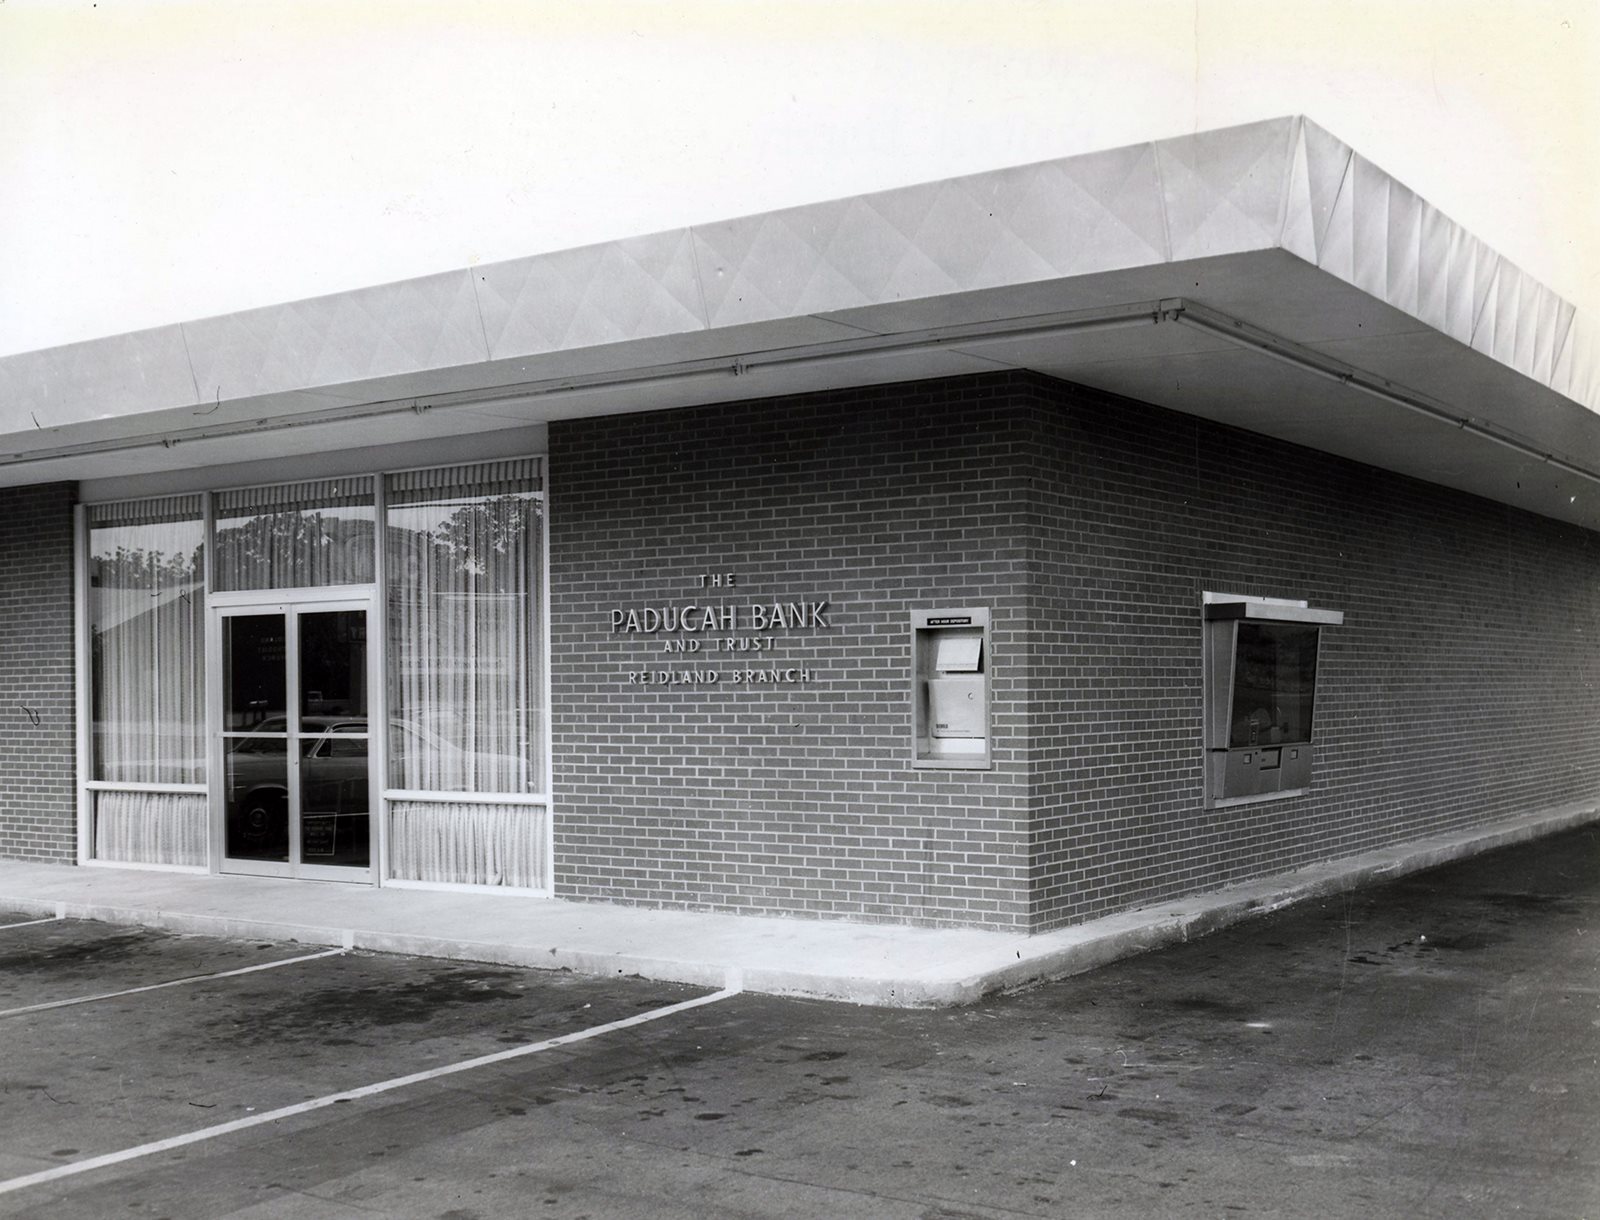 The Paducah Bank and Trust: Reidland Branch